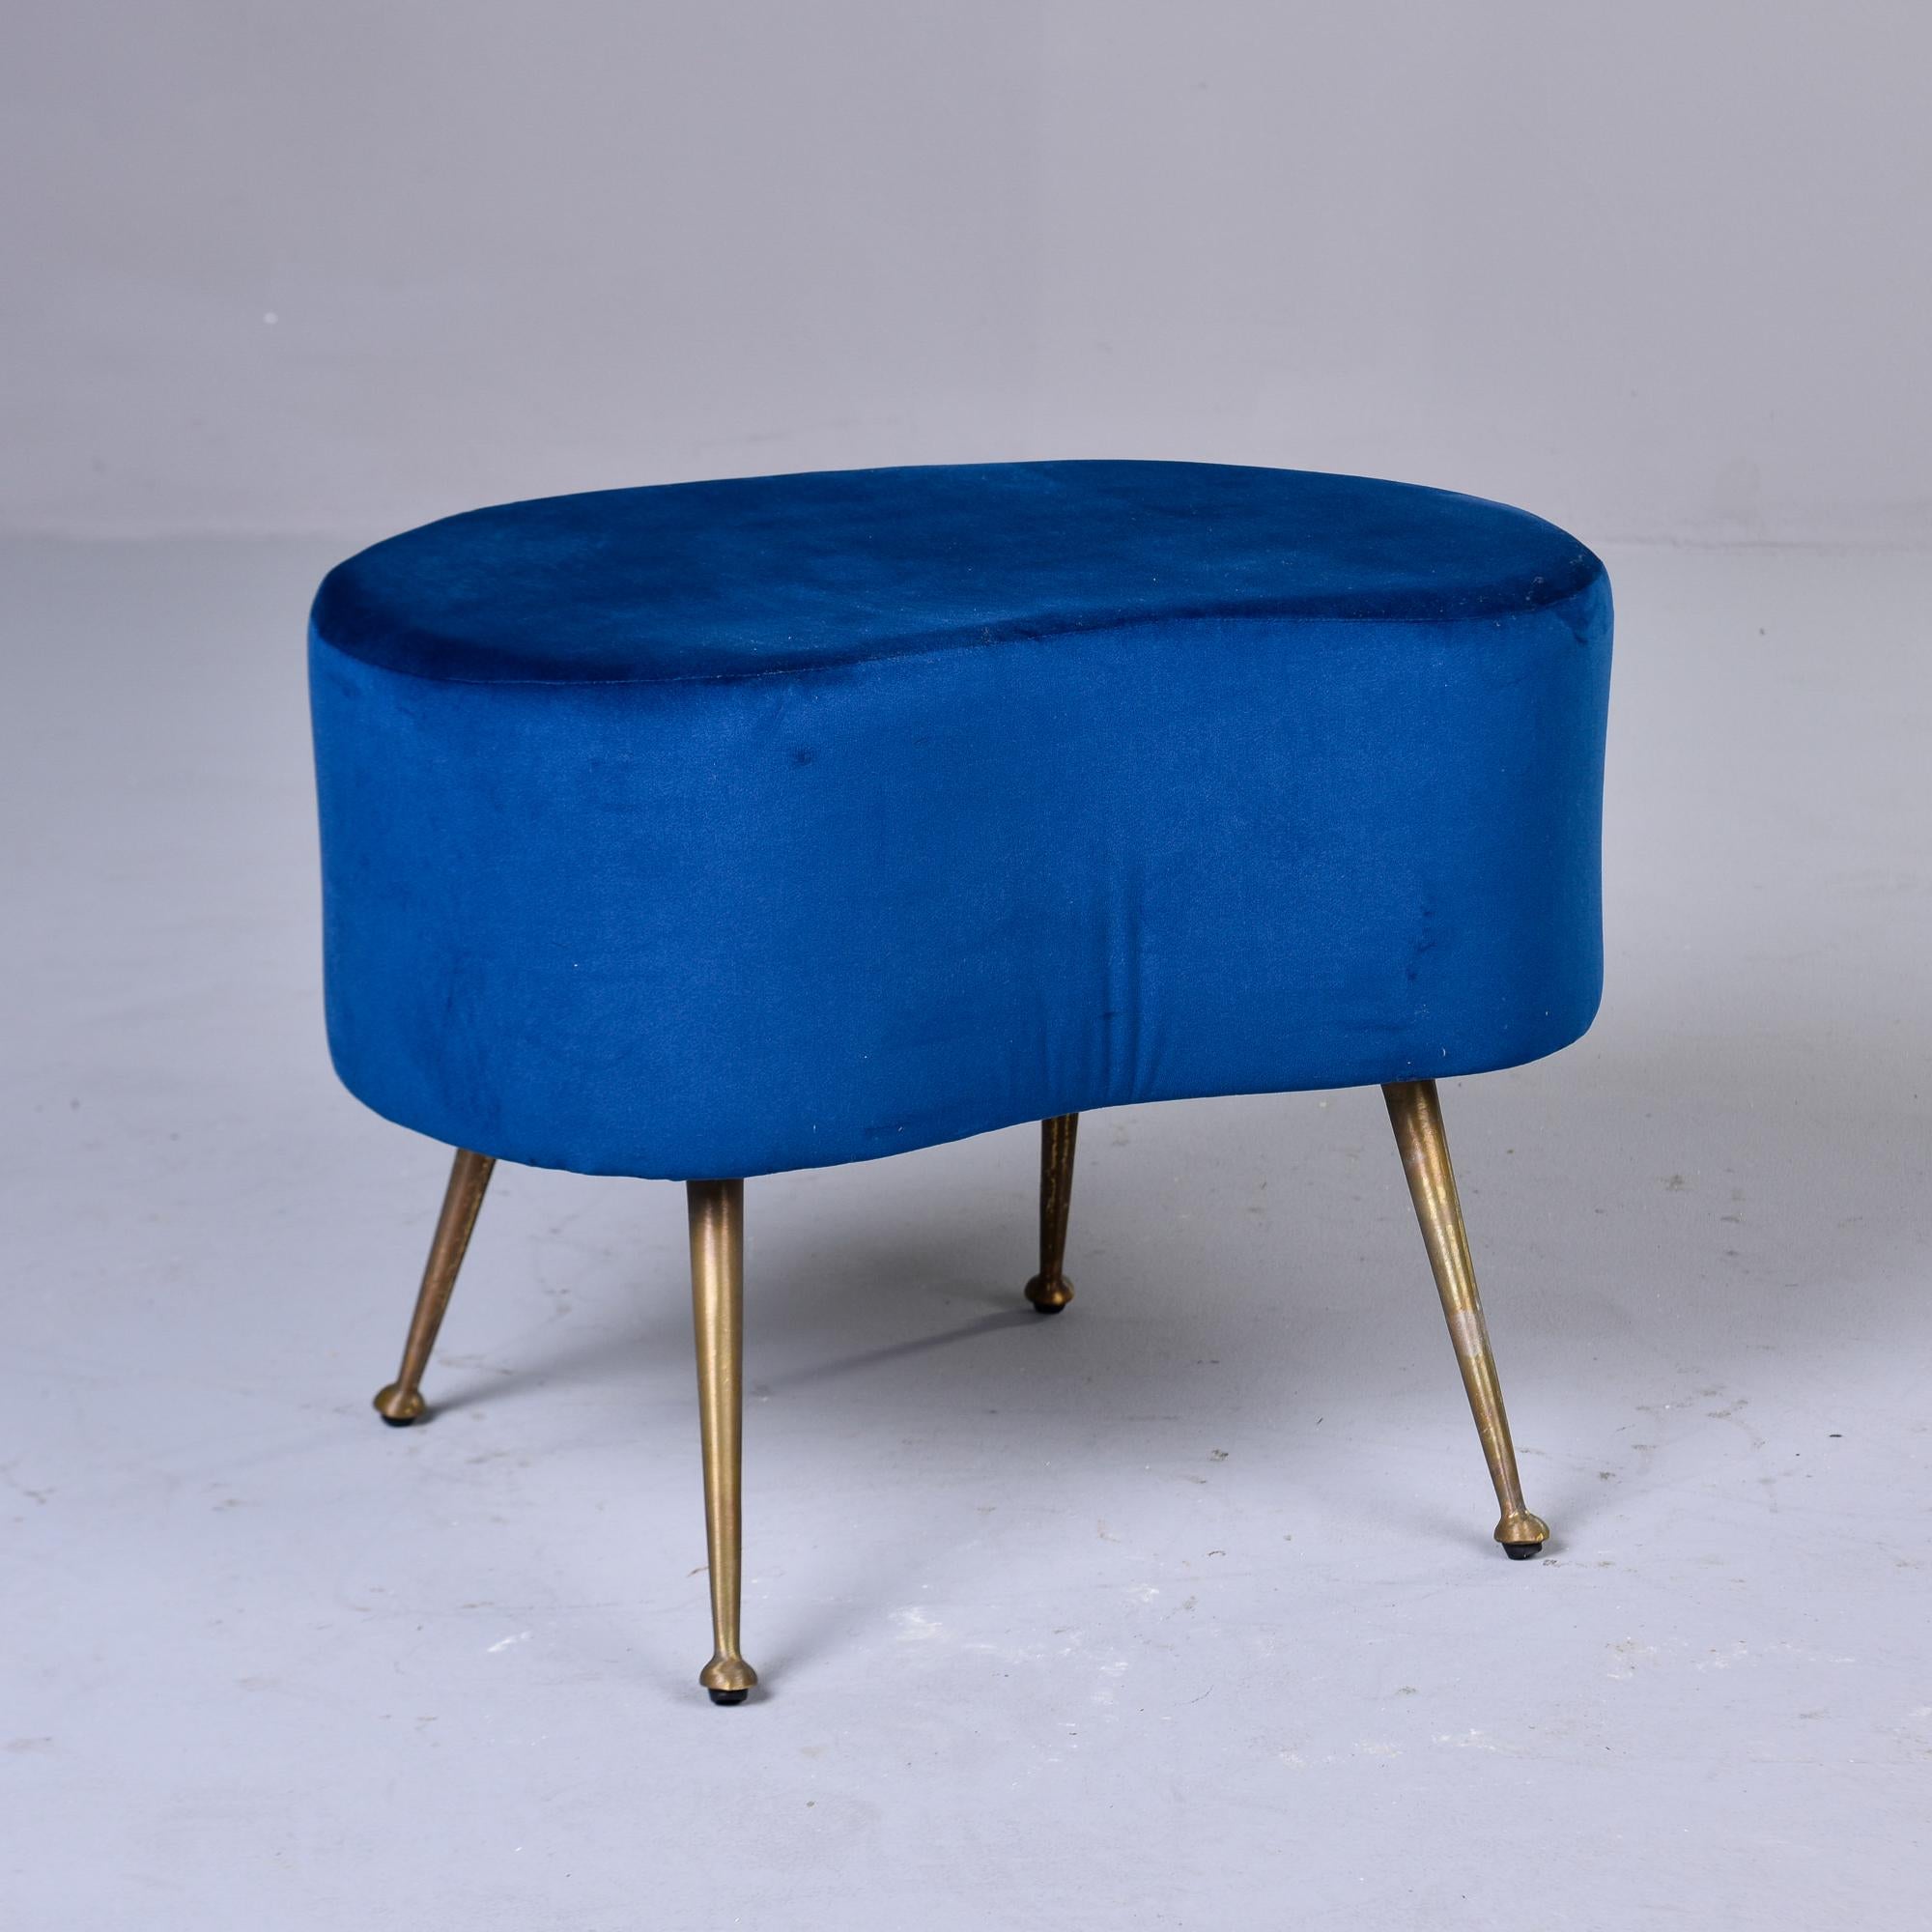 Circa late 1950s / early 1960s Italian kidney shaped stool with slender brass legs and newer royal blue velvet upholstery. Unknown maker. Two stools available at the time of this posting. Sold and priced individually. 